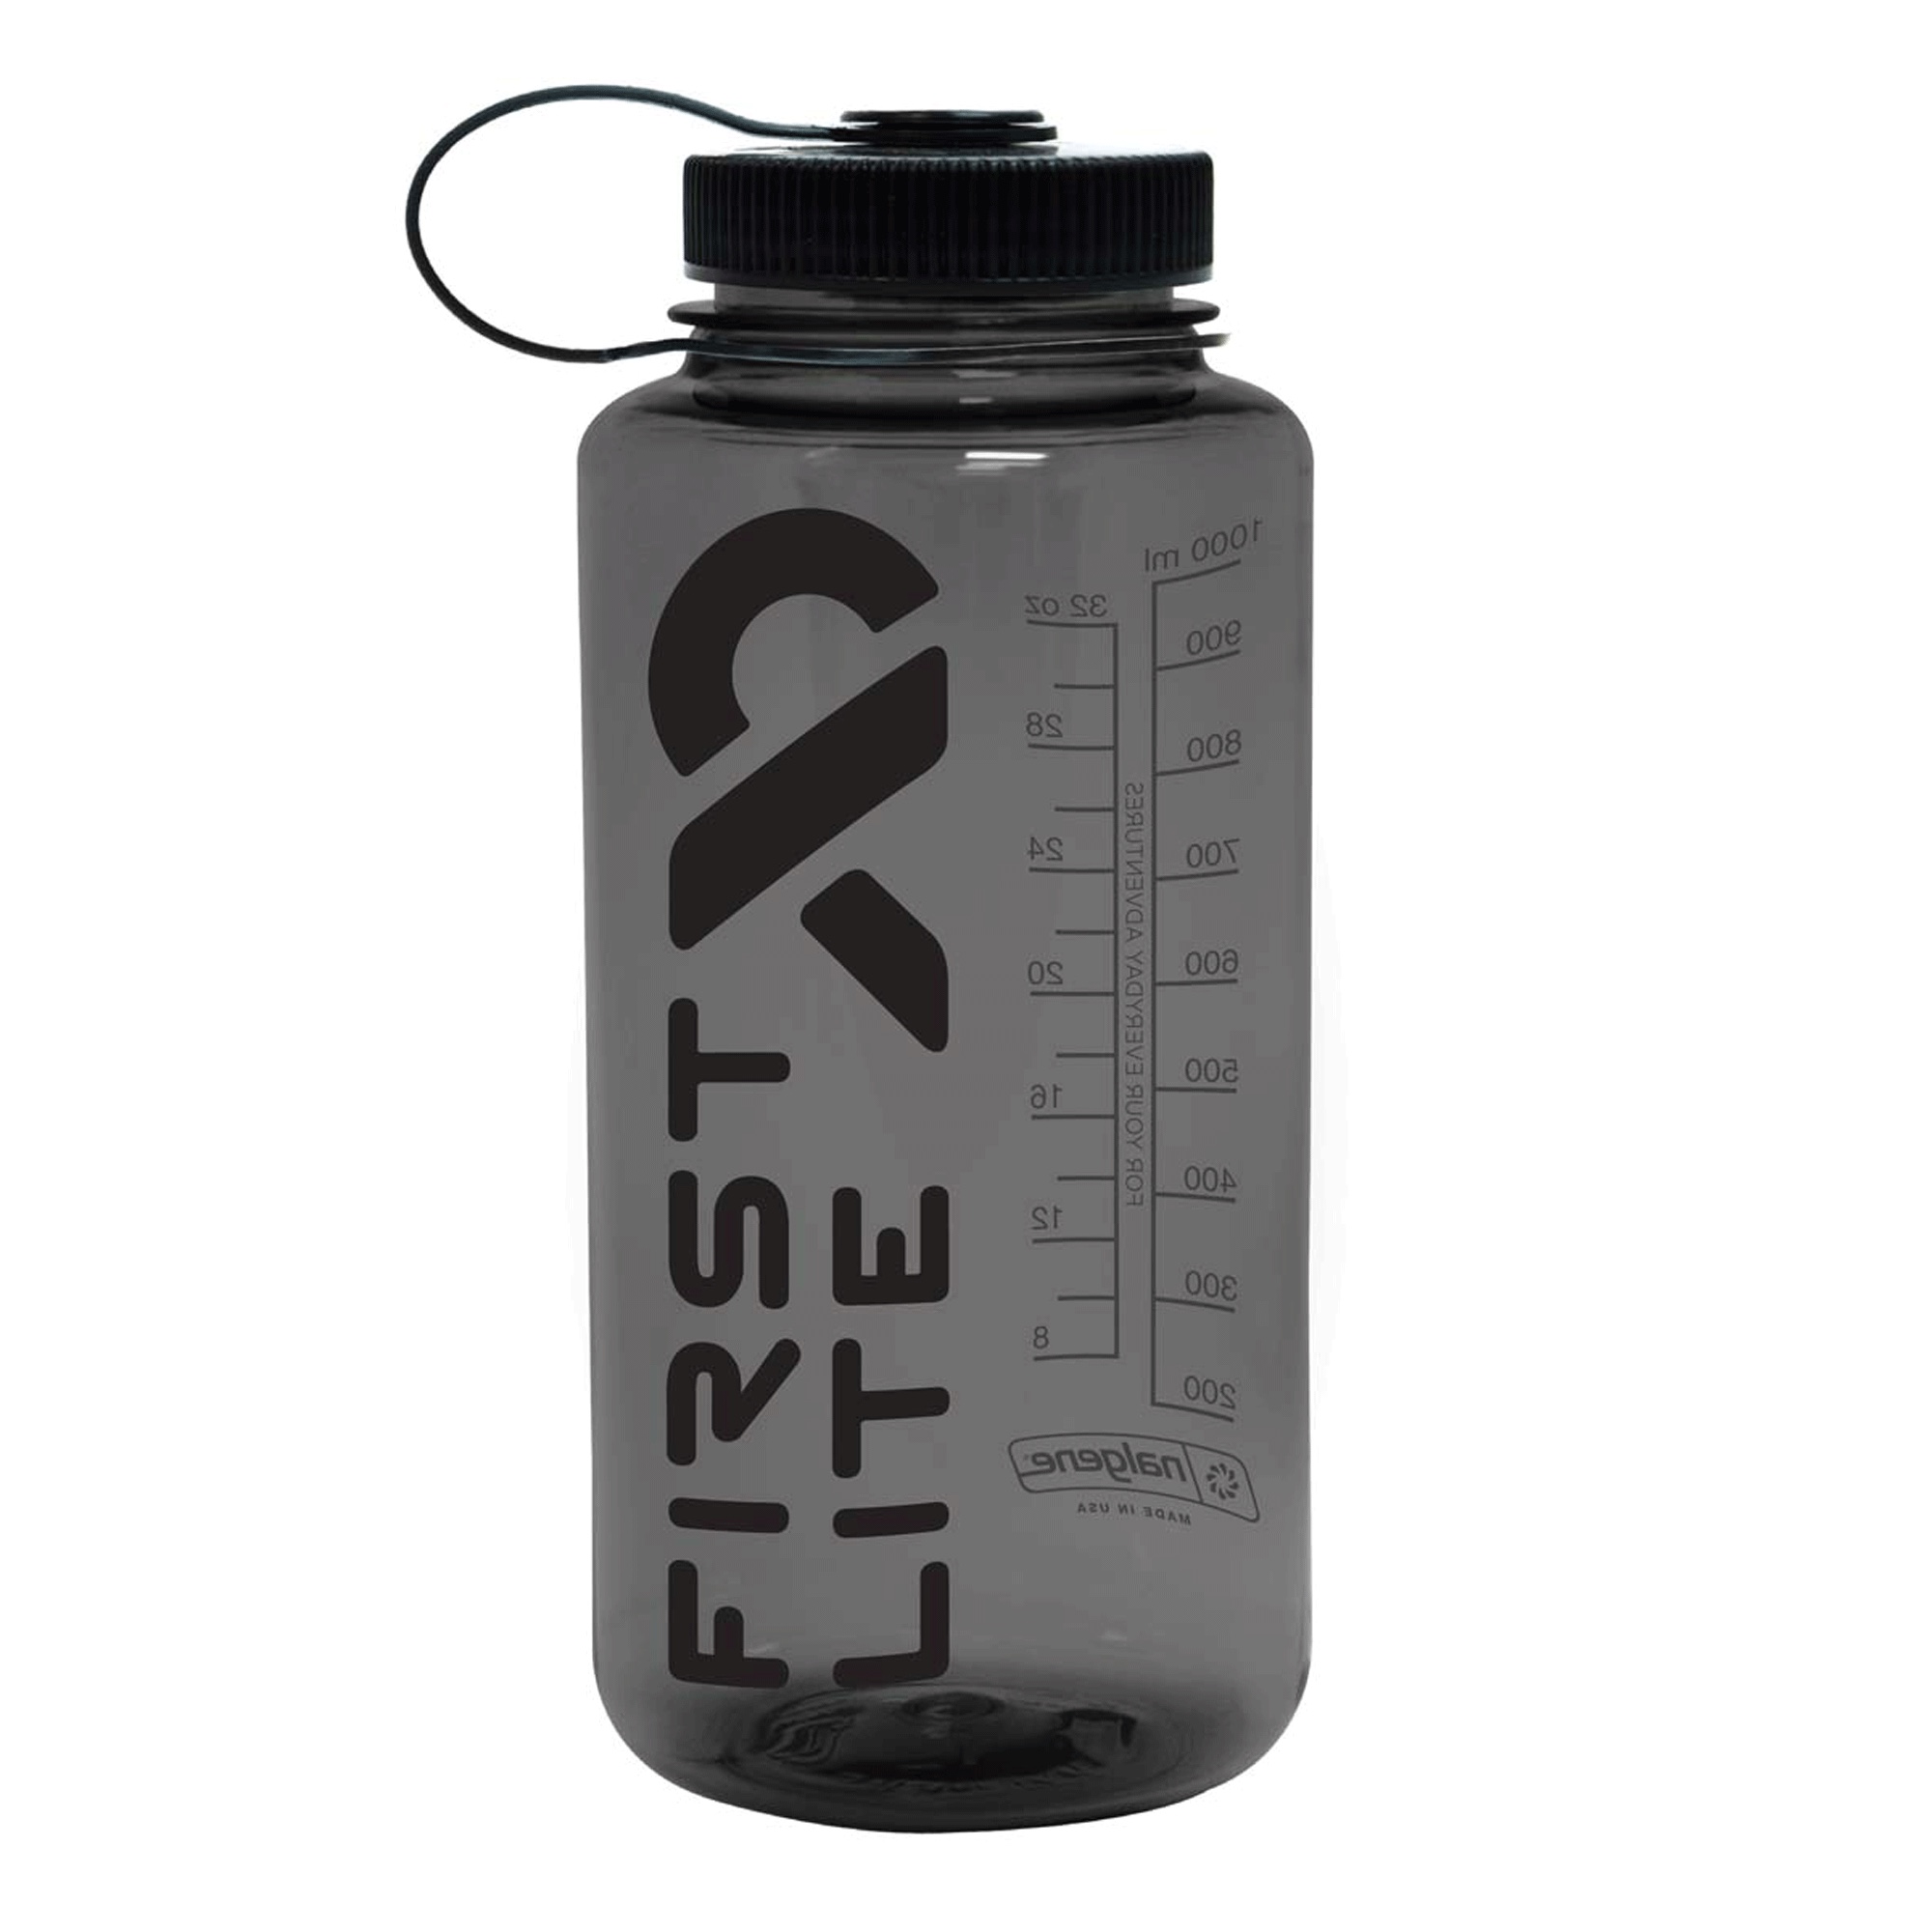 Jobo Hot/Cold water bottle and Thermos (Nalgene)